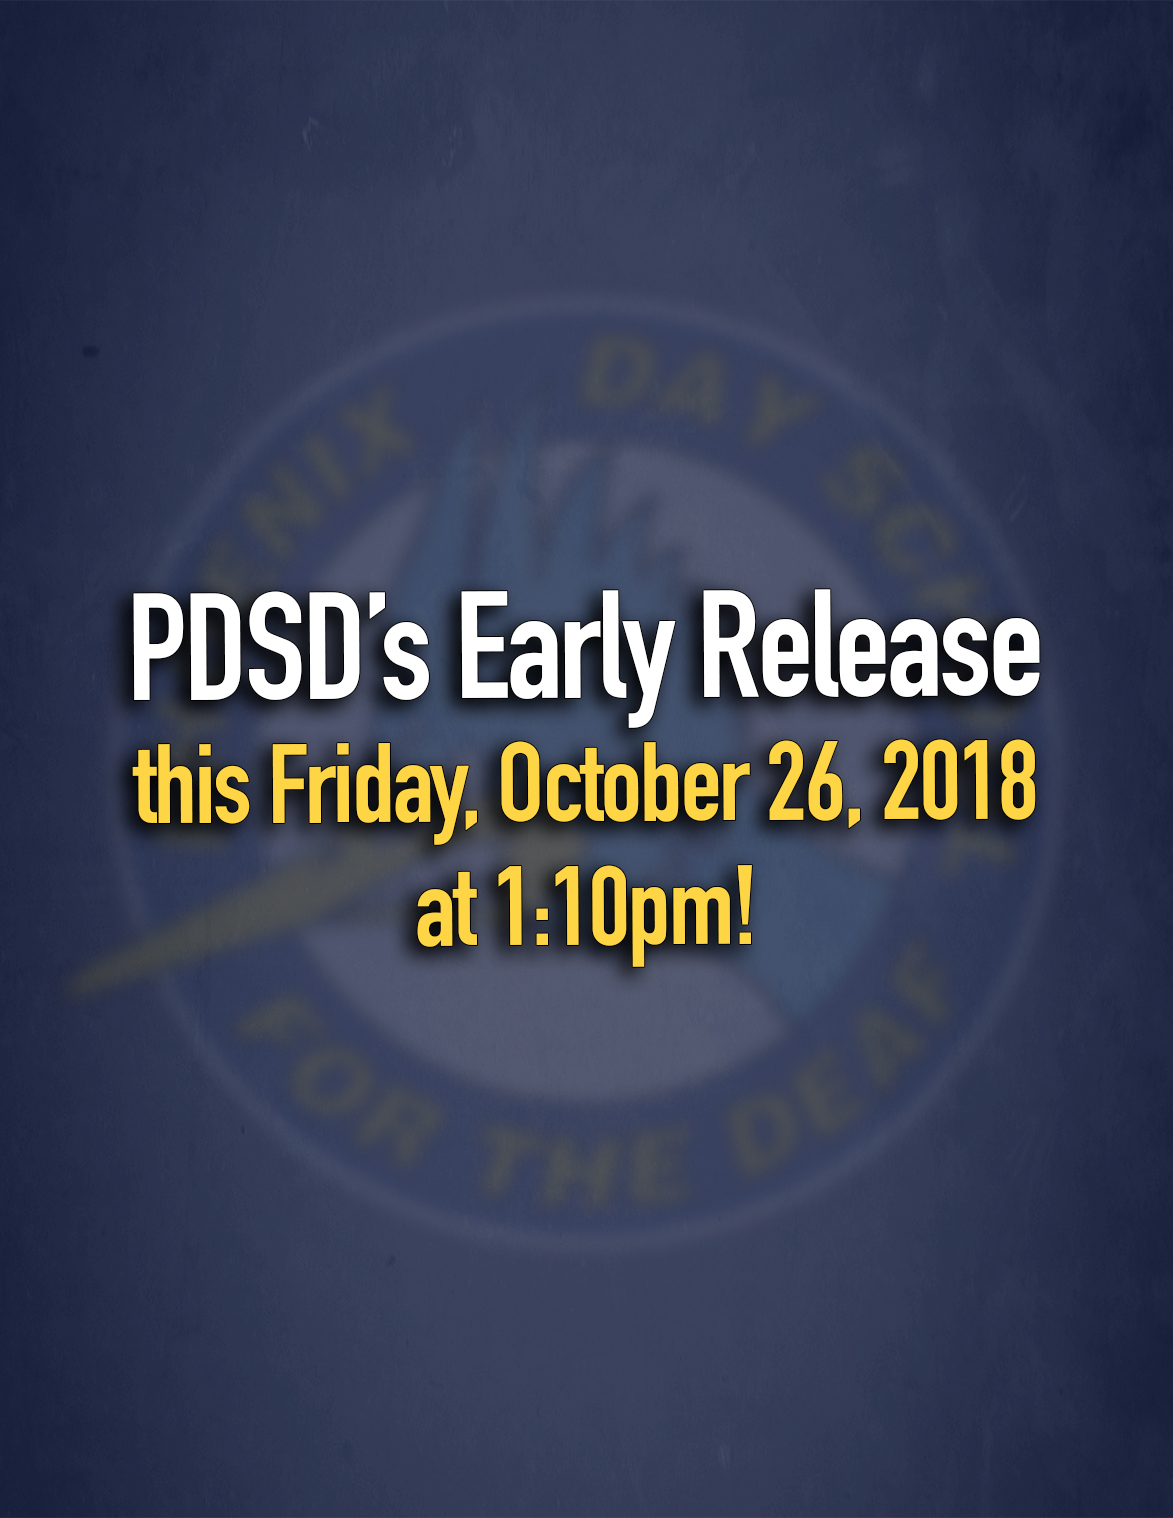 PDSD's Early Release - this Friday, October 26, 2018 at 1:10pm.